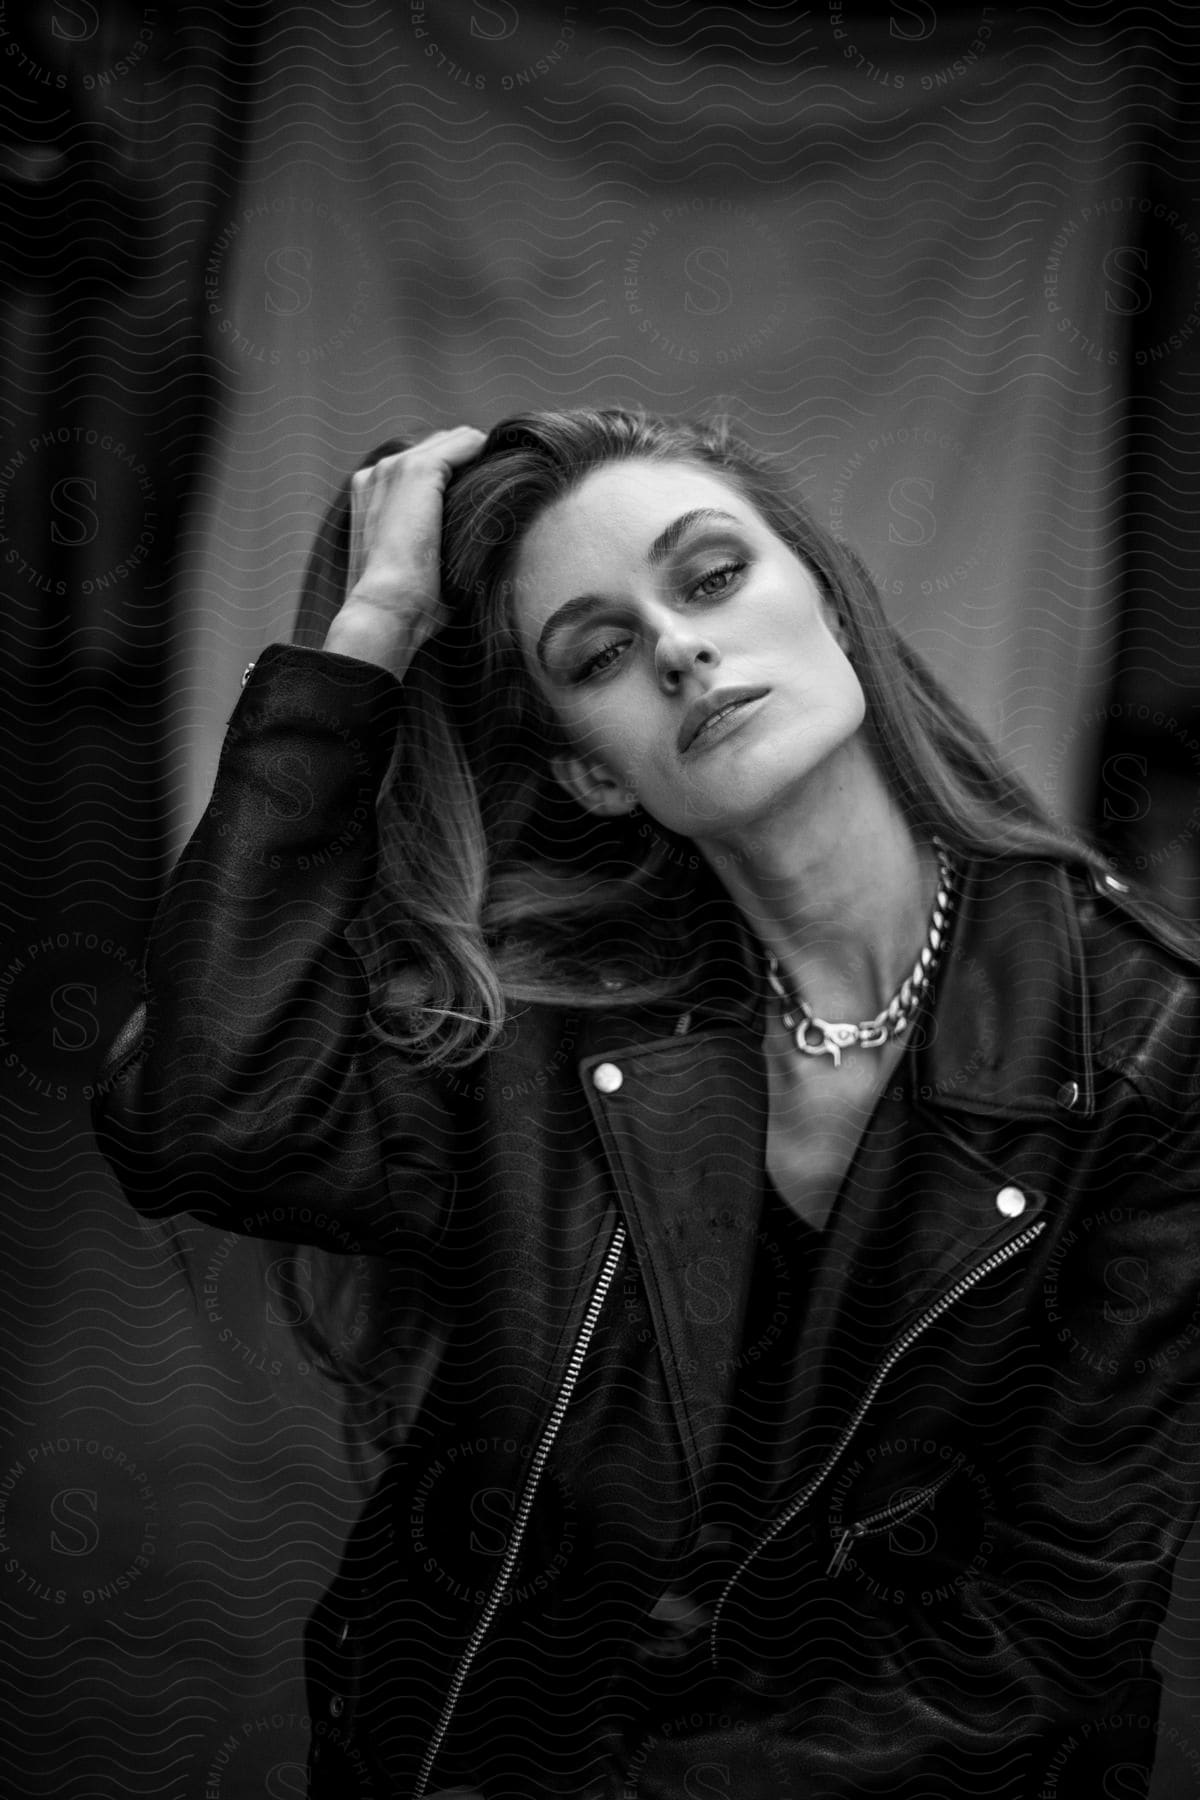 A young woman models a black leather jacket and a thick, chain necklace.